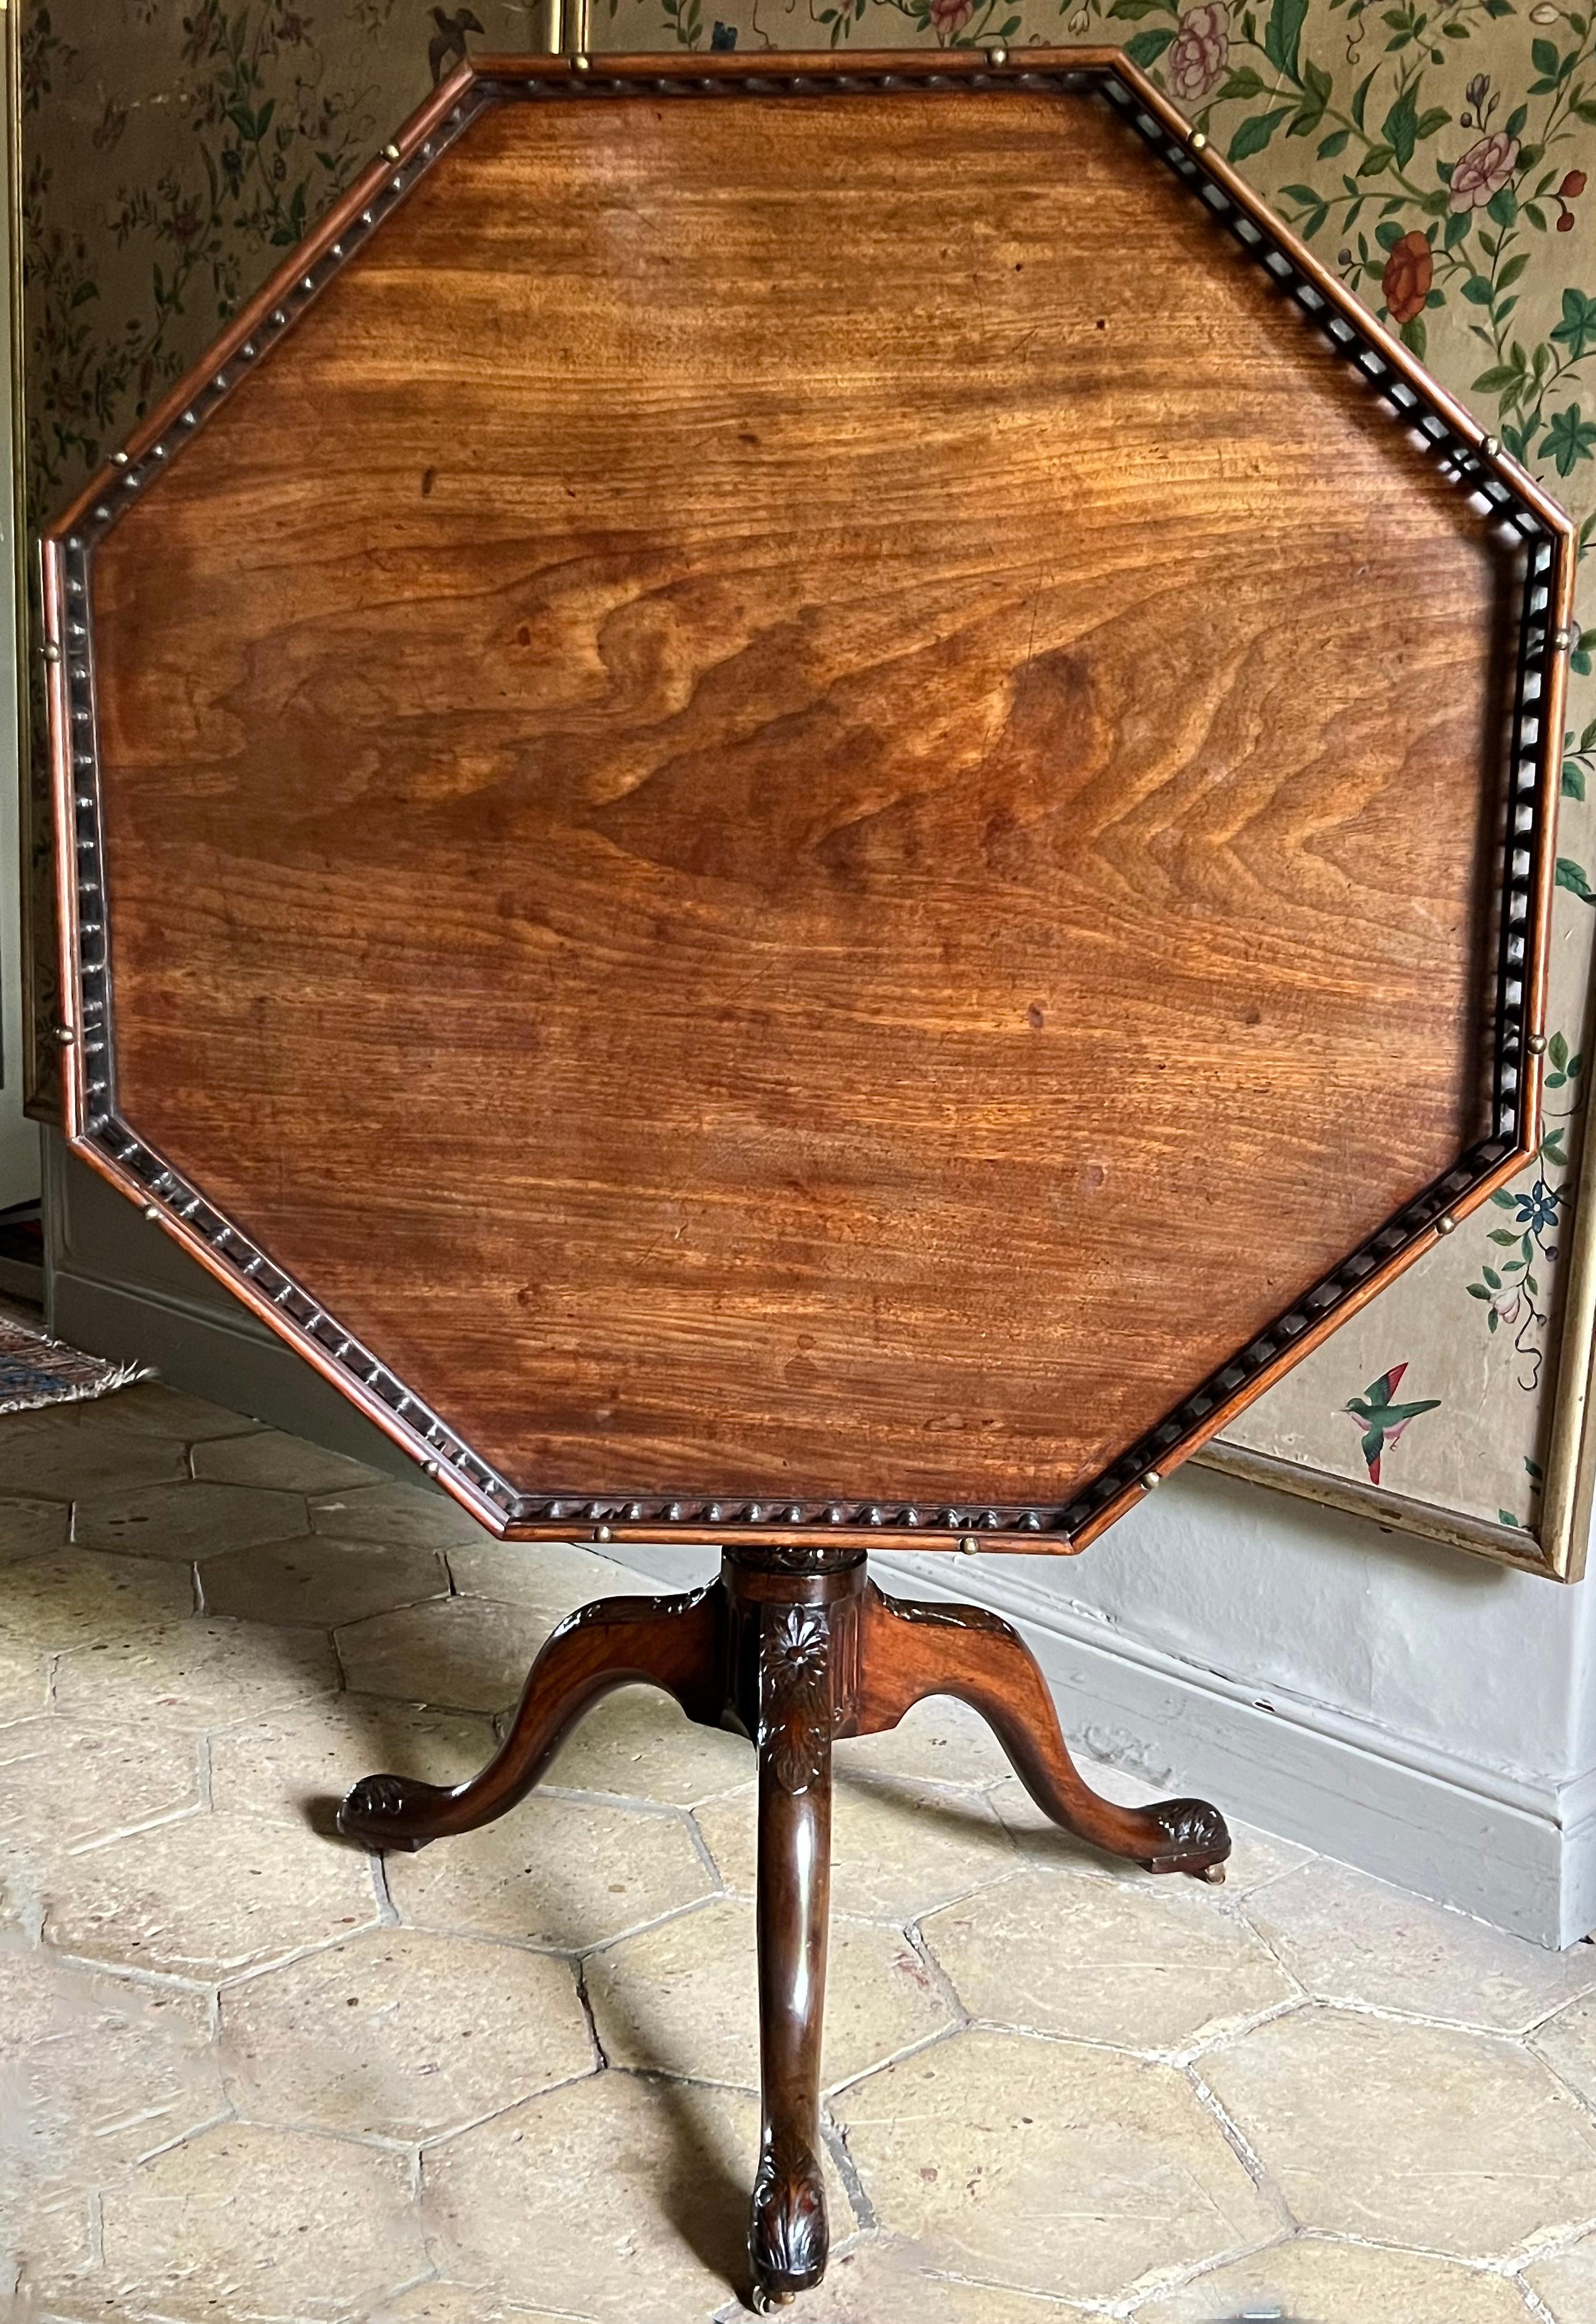 This fine, larger than usual, George ll-period table has a baluster-galleried octagonal top supported on a birdcage, allowing the top to both swivel and tilt. Note the fine, tapering, fluted column continuing into a carved collar. The well-drawn